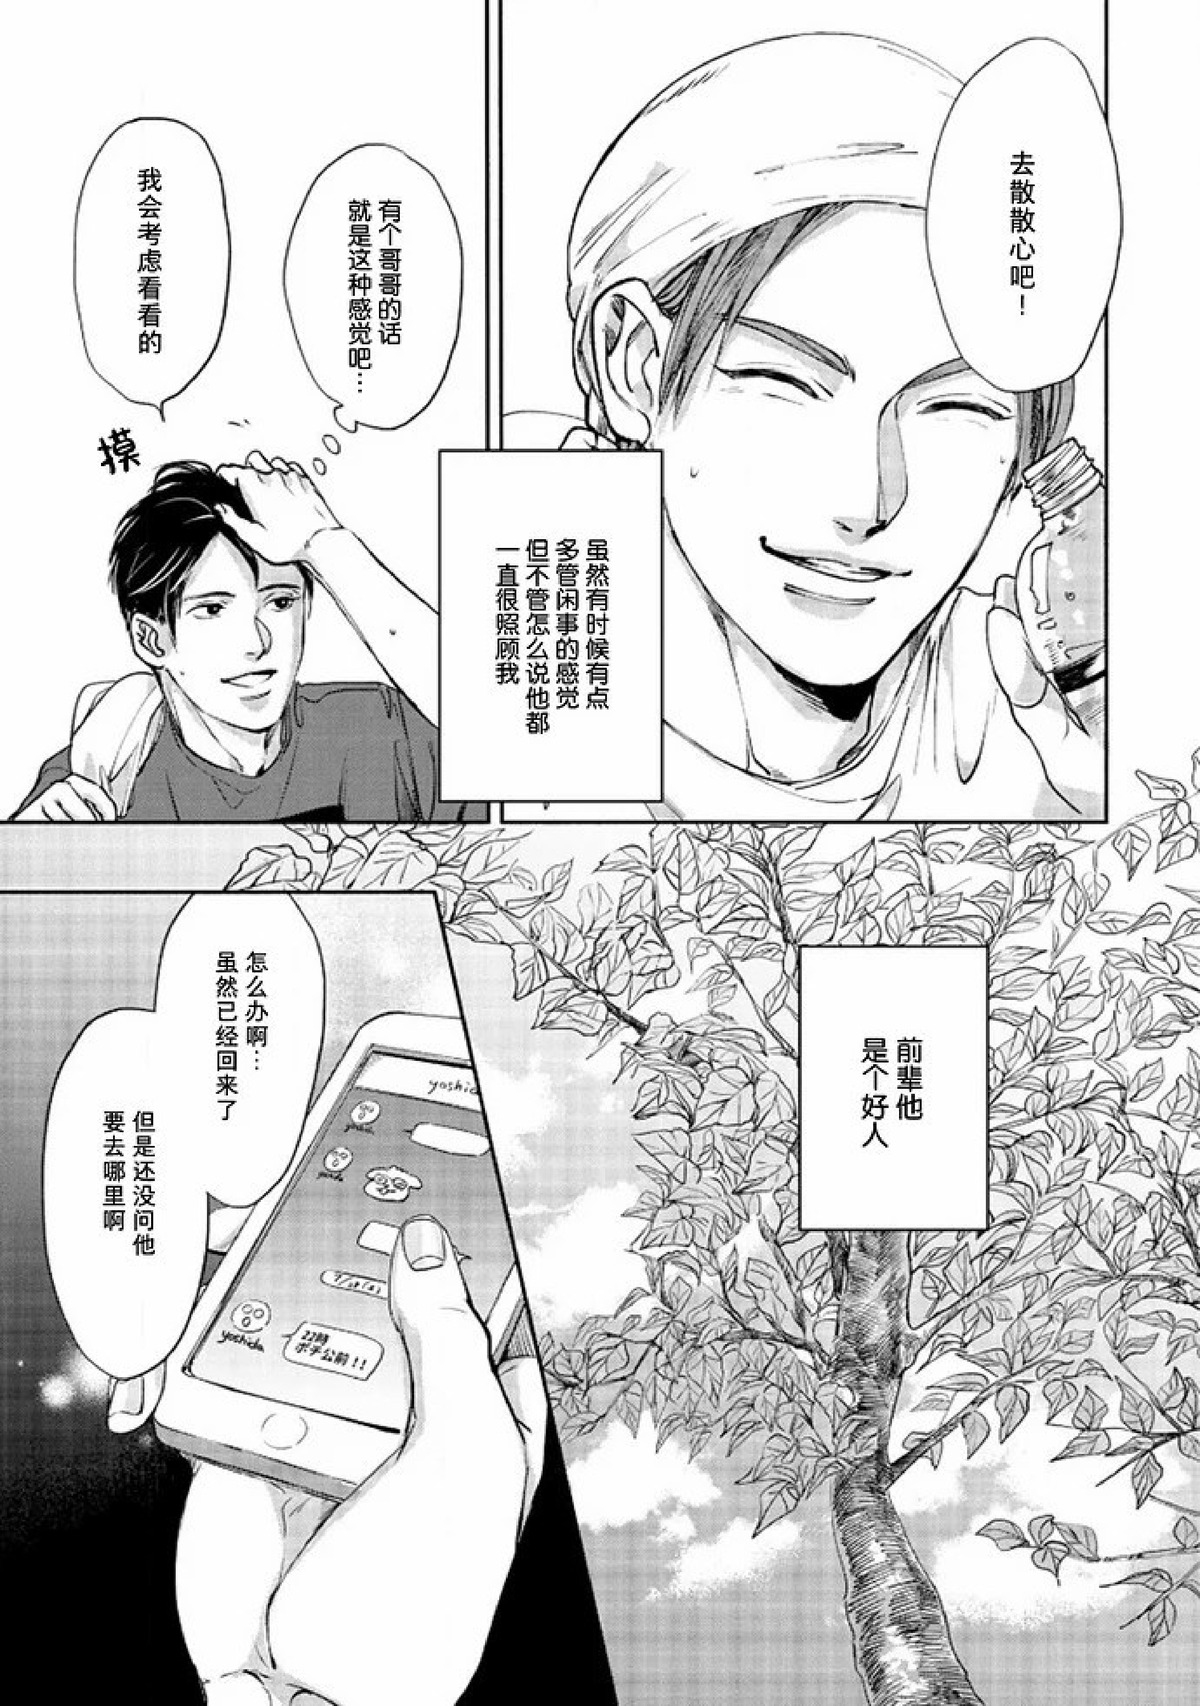 【Two sides of the same coin[腐漫]】漫画-（上卷01-02）章节漫画下拉式图片-25.jpg